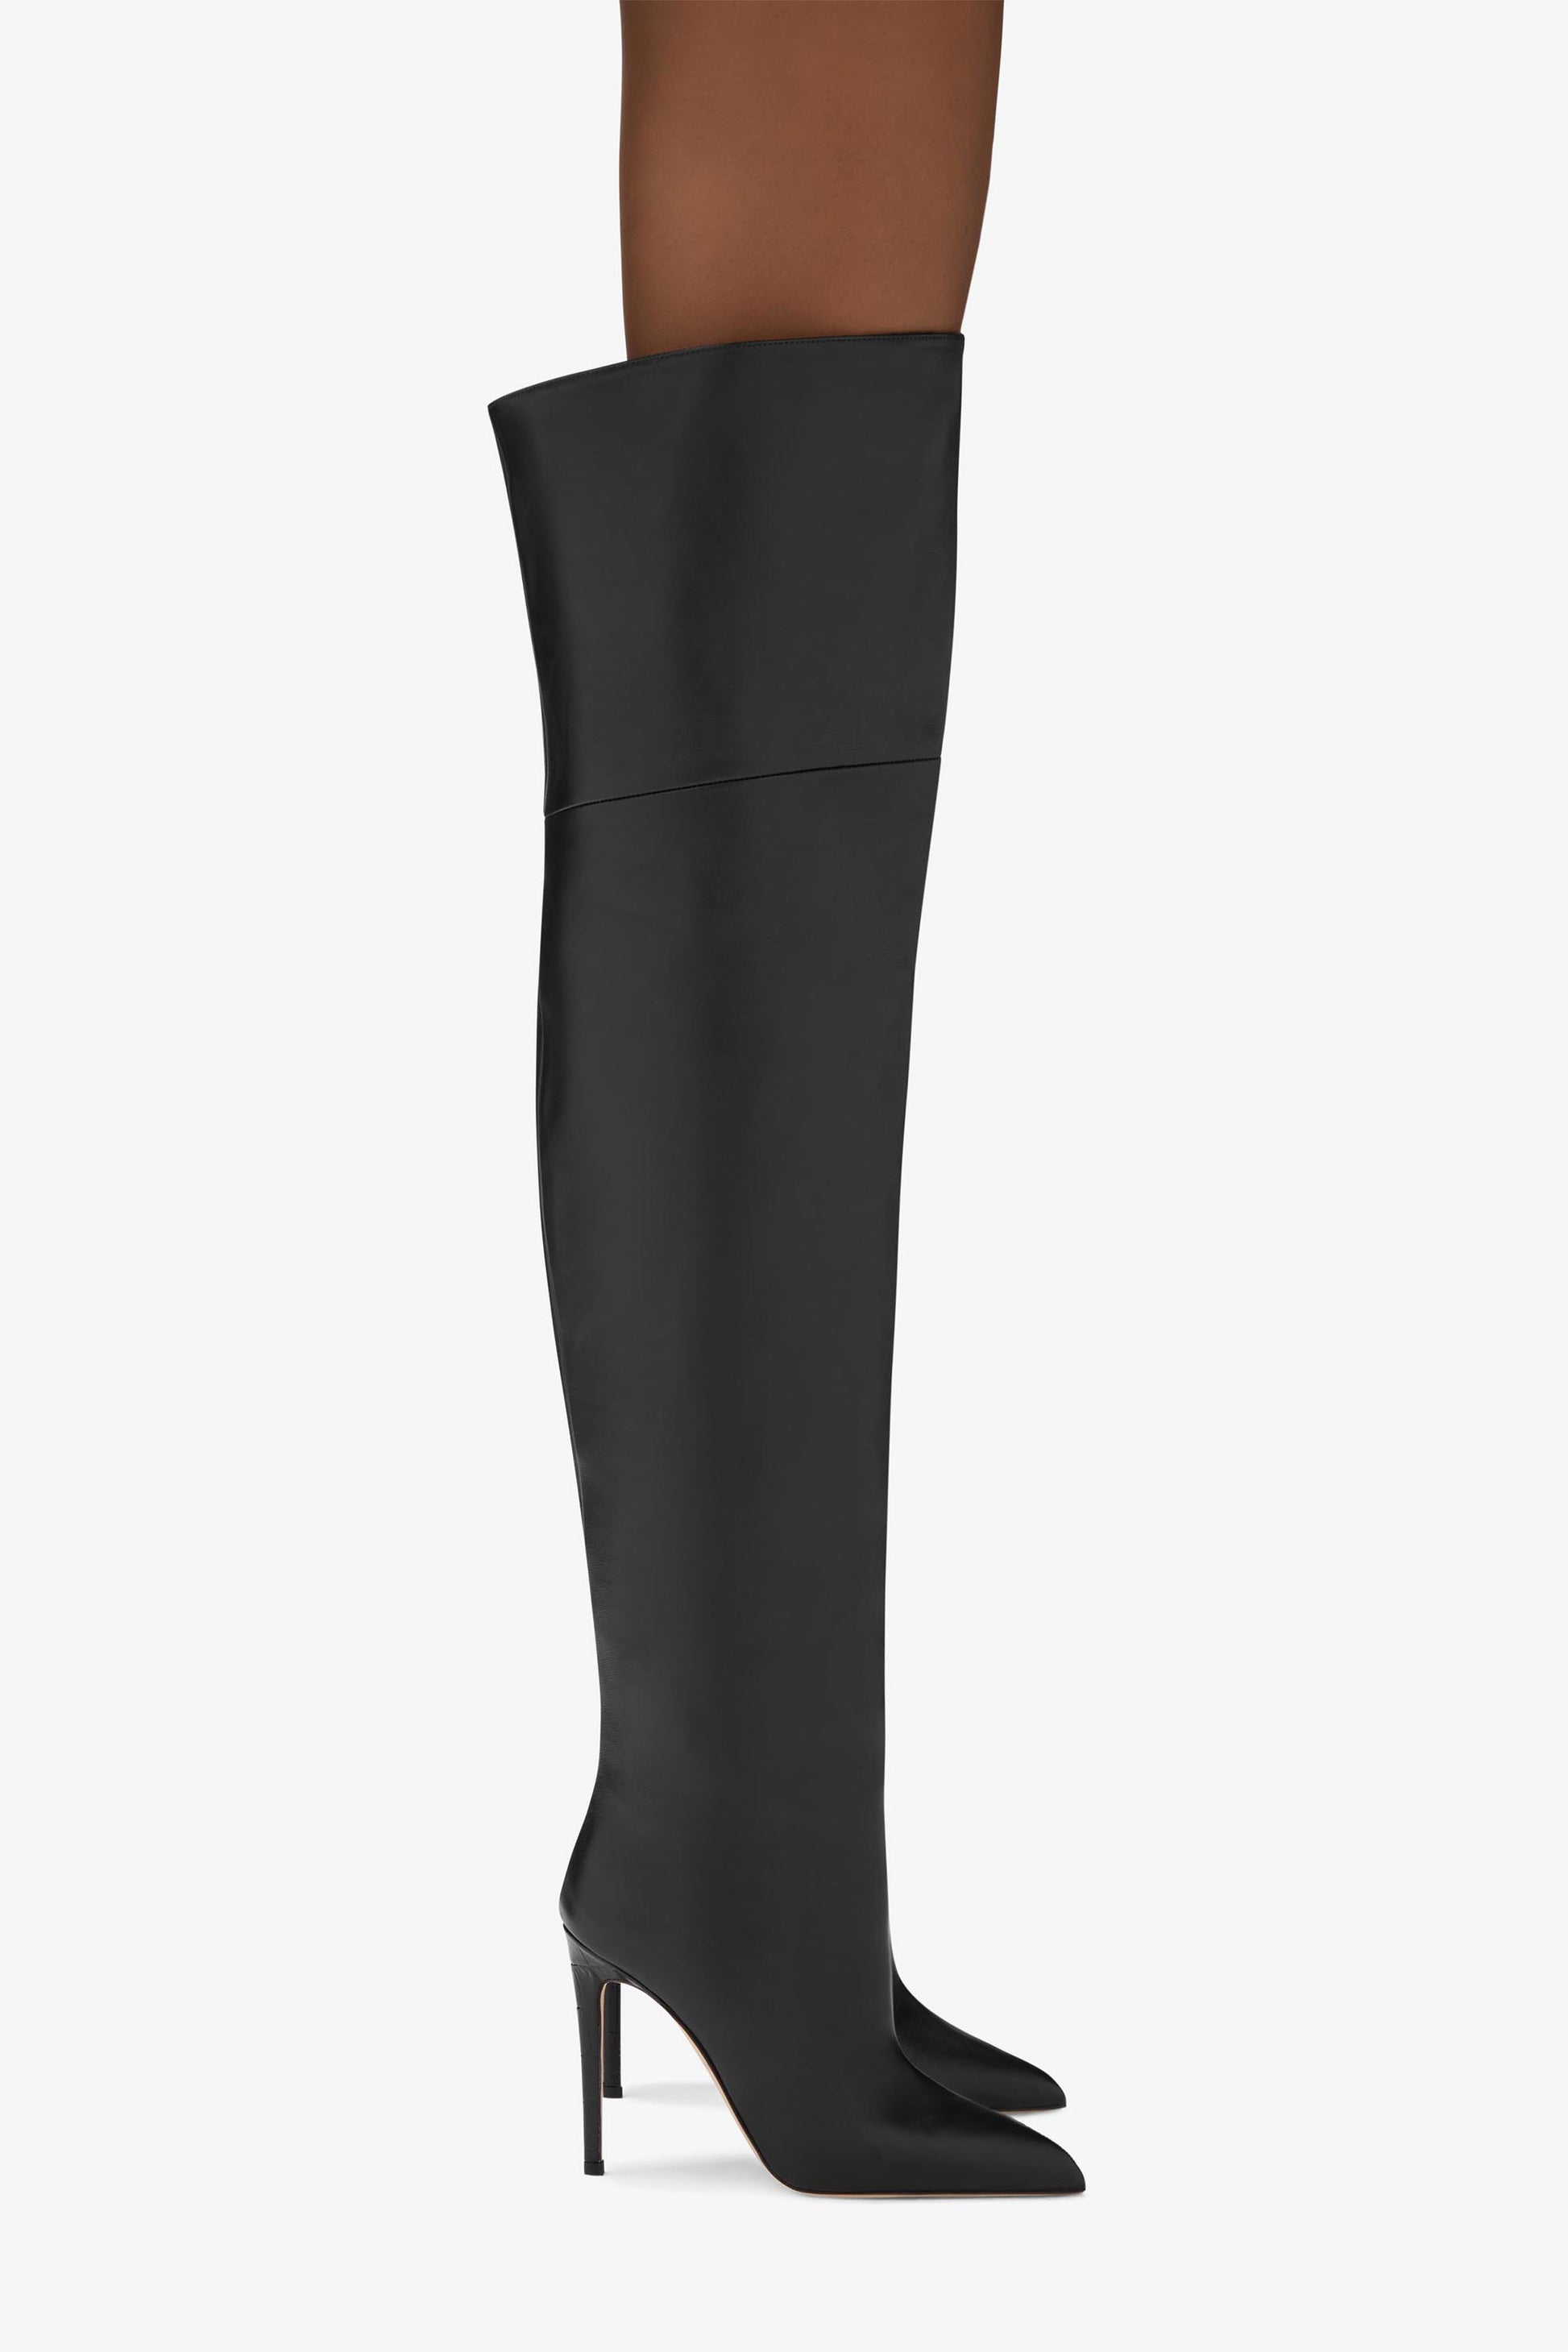 Black nappa leather stiletto over the knee boots - Product worn